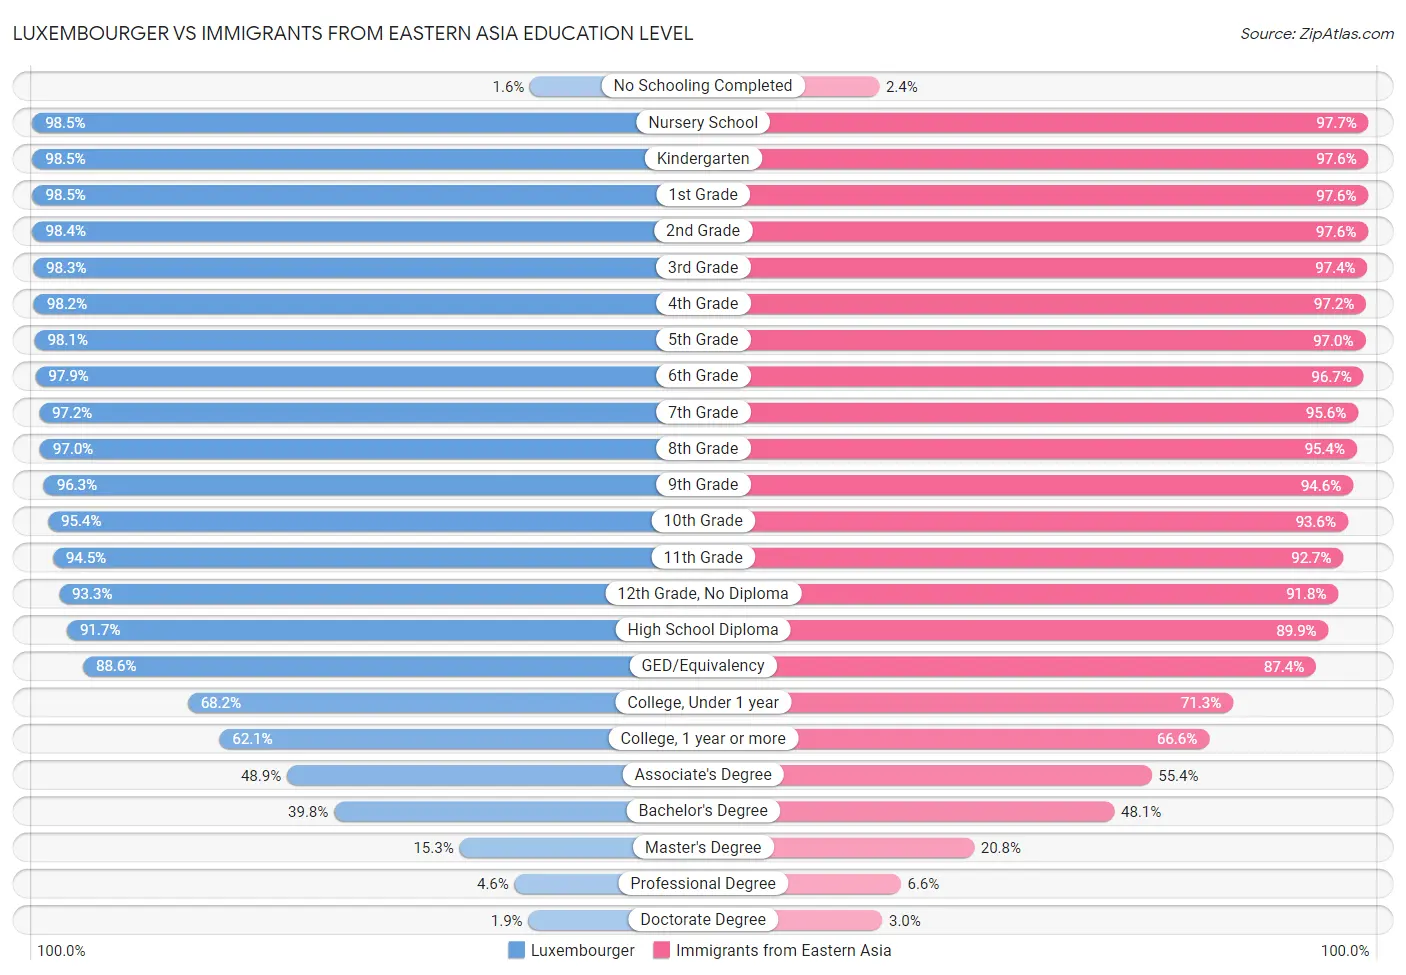 Luxembourger vs Immigrants from Eastern Asia Education Level